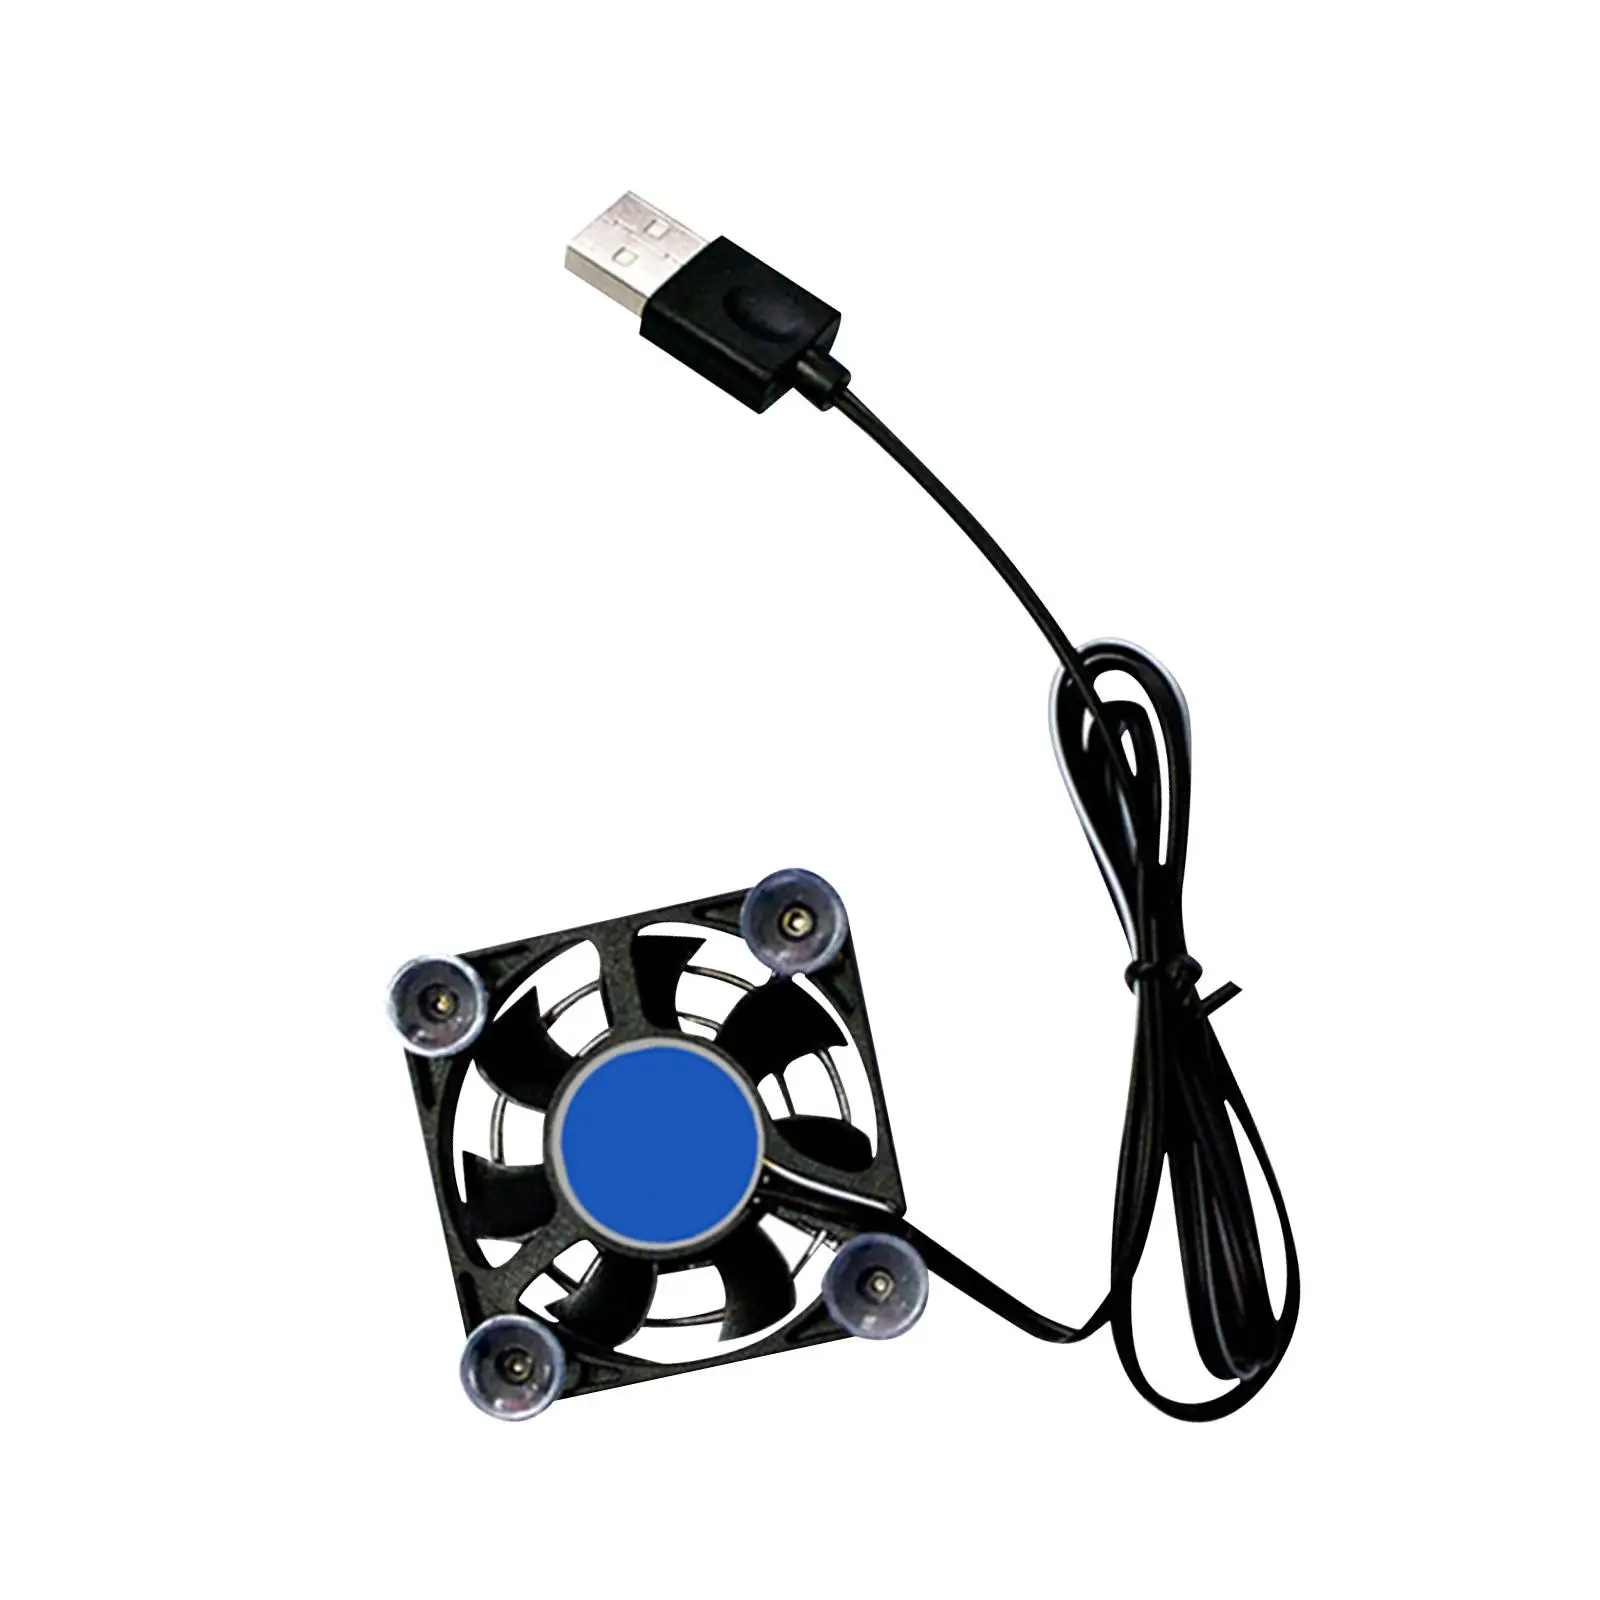 Phone Cooling Fan Cooler with Suction Cup Mini Cellphone Radiator for Smartphones Live Watching Movies Mobile Gaming